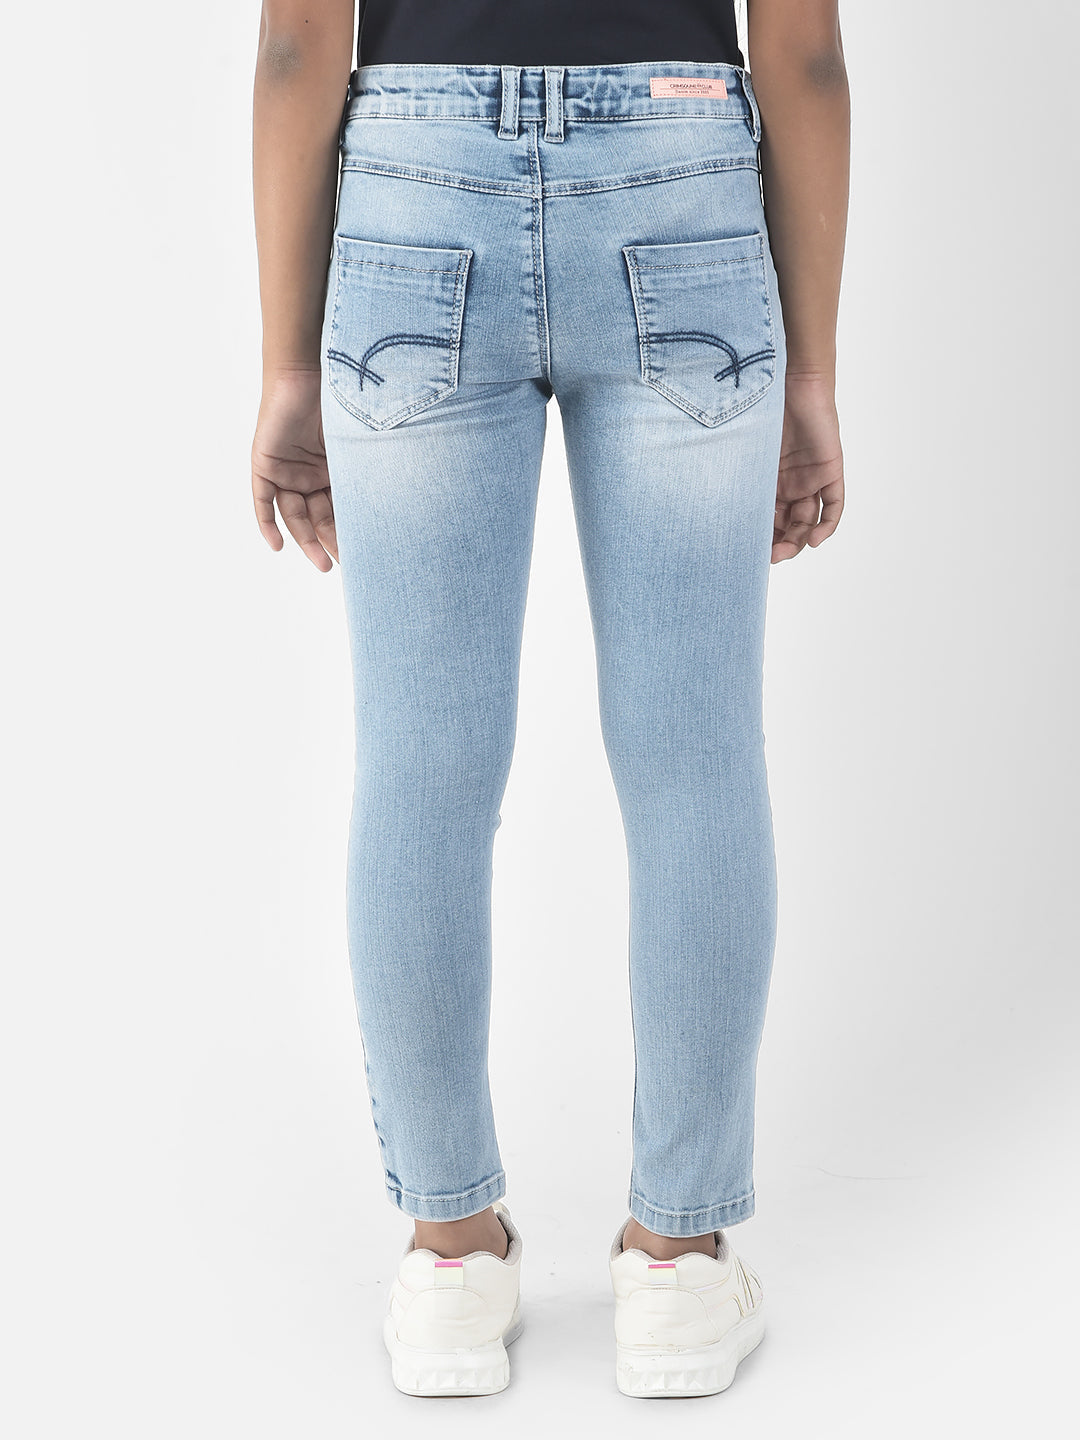  Blue High-Rise Jeans